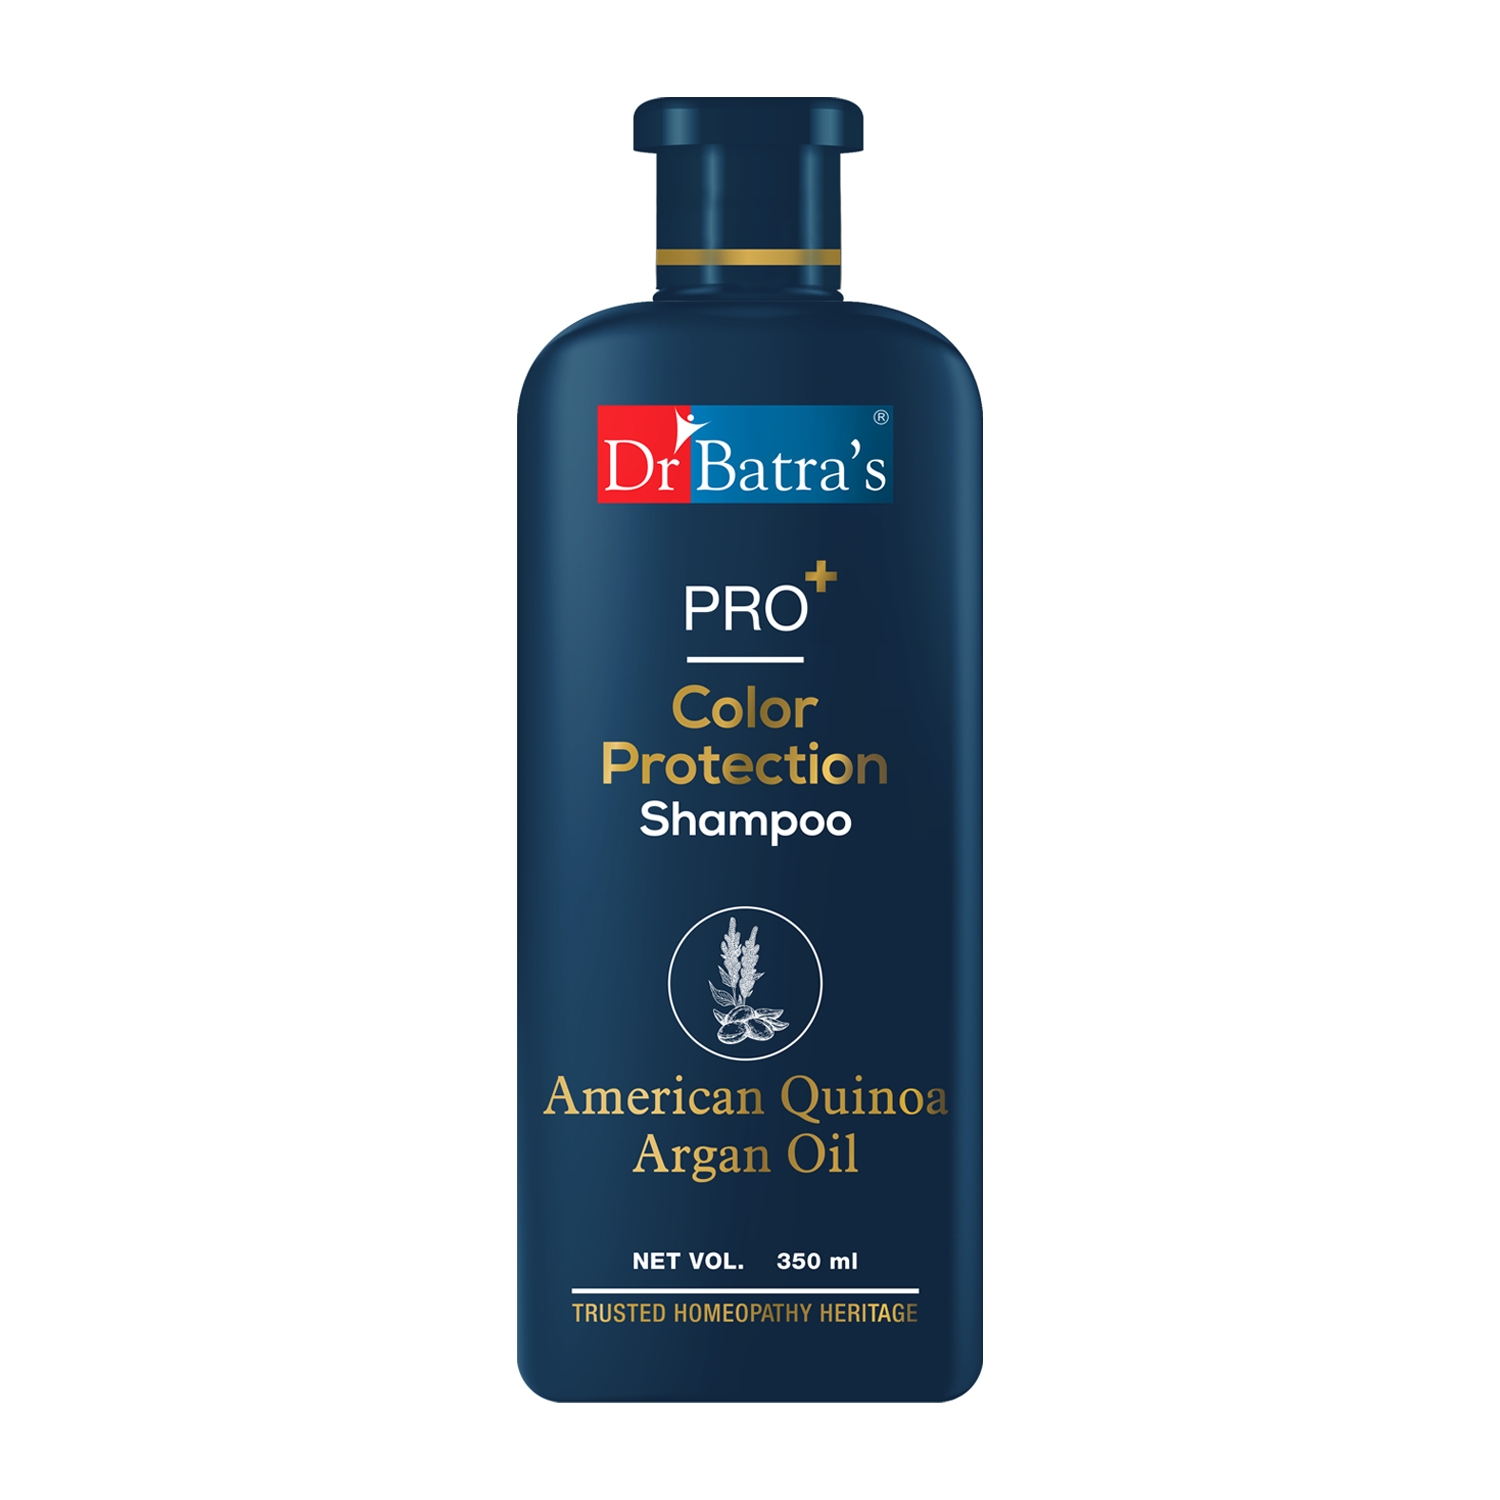 Dr Batra's | Dr Batra’s®PRO+Color Protection Shampoo. Contains American Quinoa, Moroccan Argan Oil, Thuja Extracts. Sulphate, Paraben, Silicone Free. Suitable for men and women. 350 ml